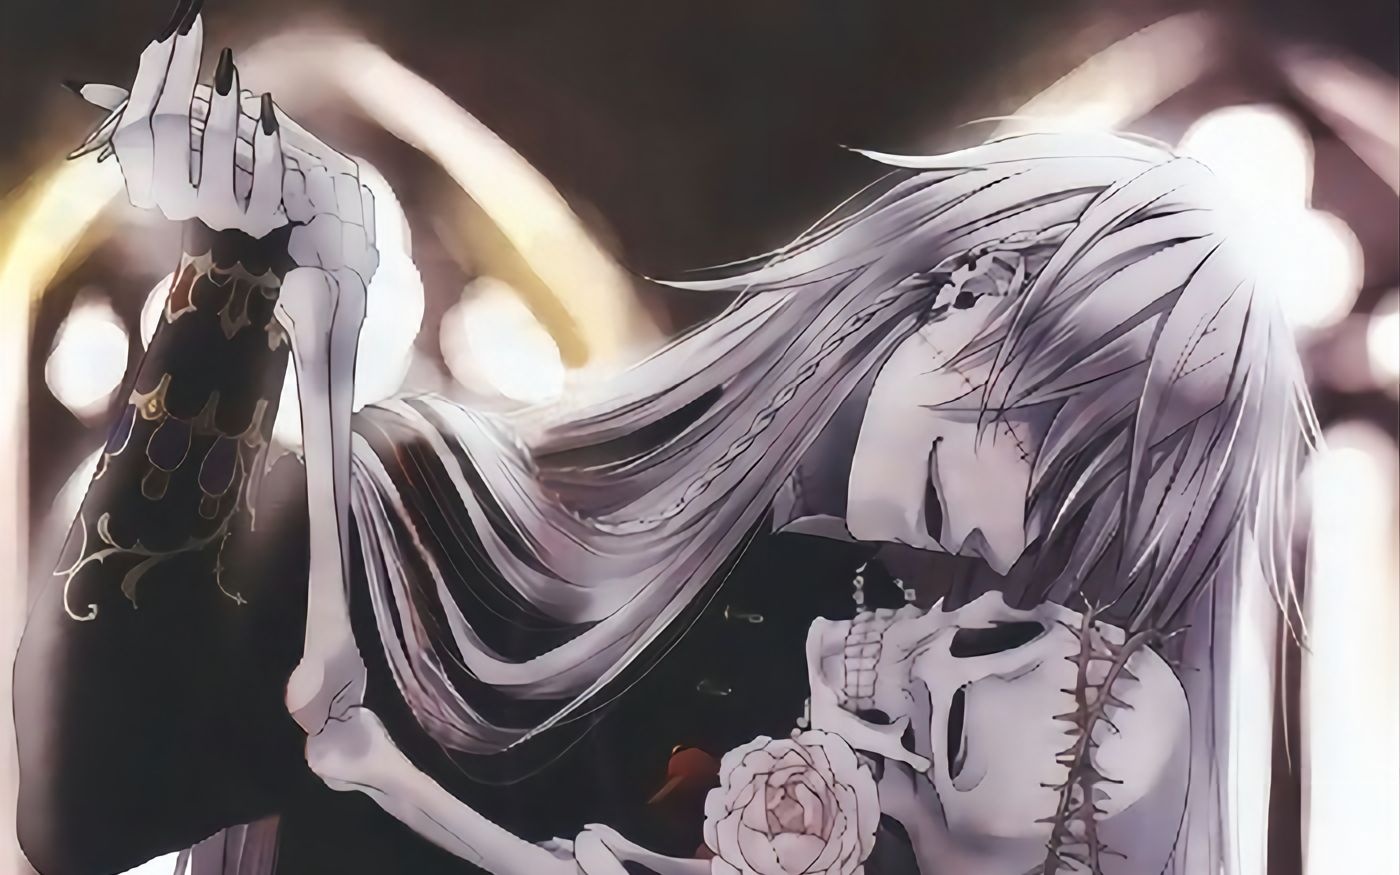 Black Butler: 10 More Hidden Facts About The Undertaker